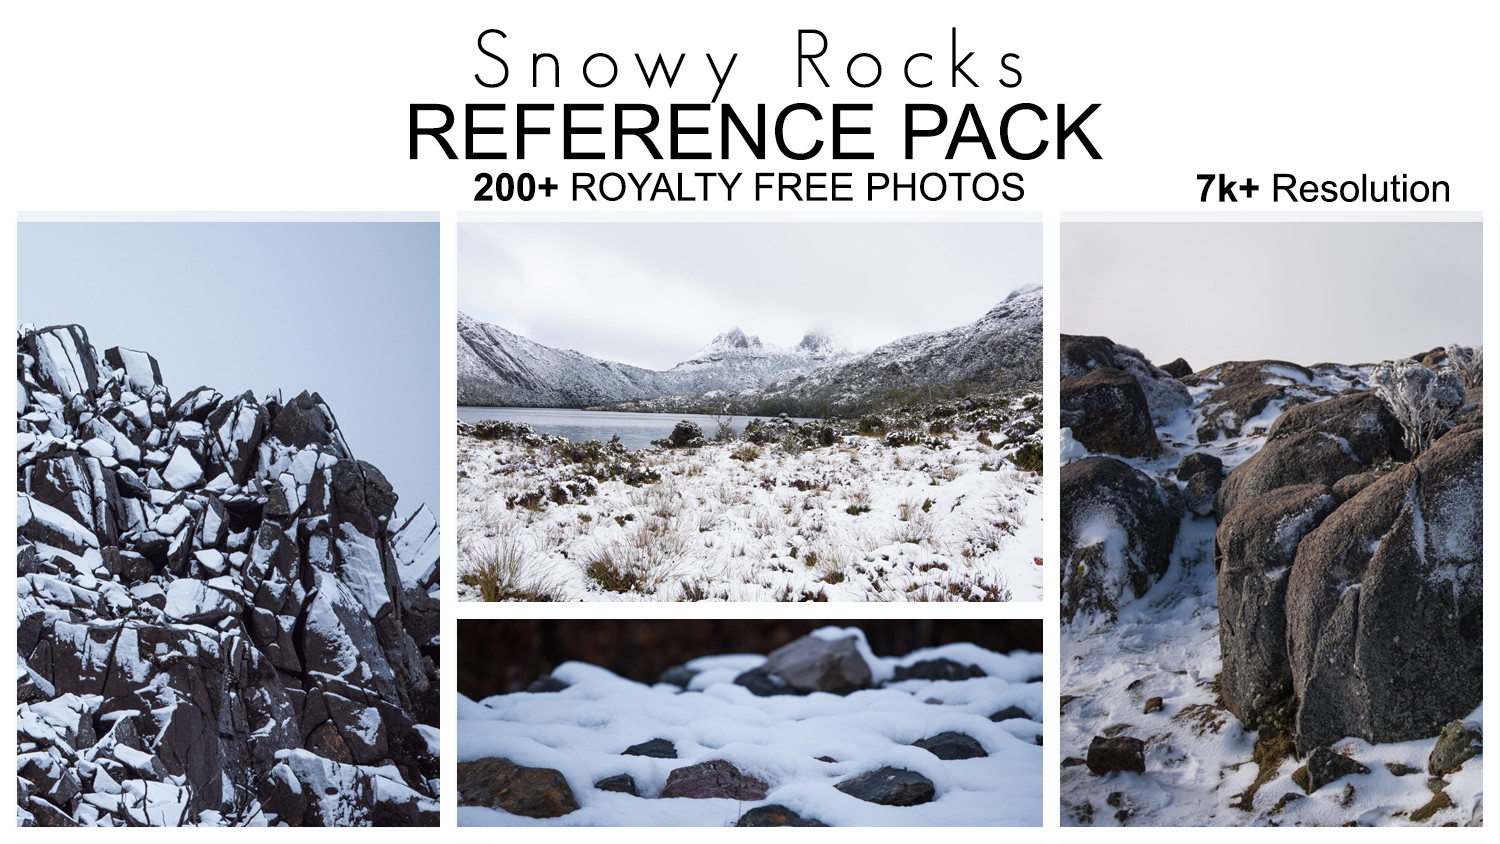 Artstation Reference Pack Snowy Rocks 0 Royalty Free Photos Resources